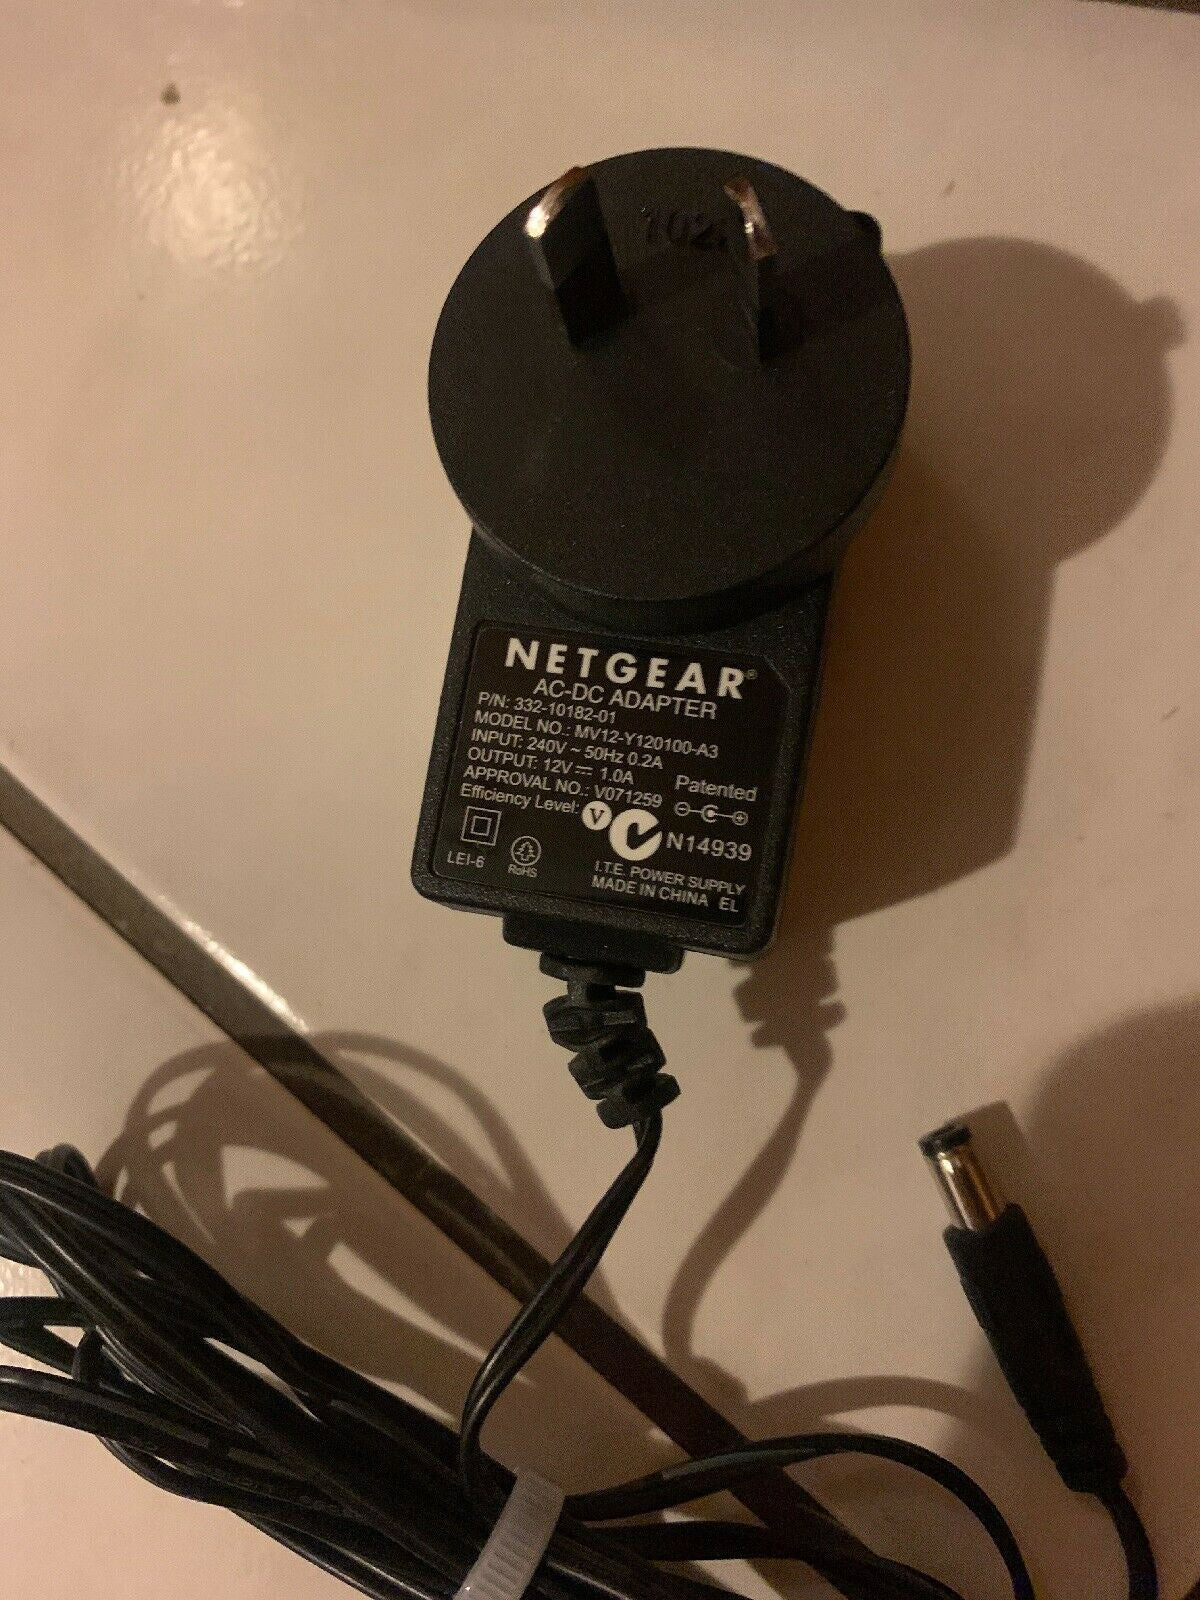 Genuine Netgear MV12-Y120100-A3 AC Adapter for router 12v 1A